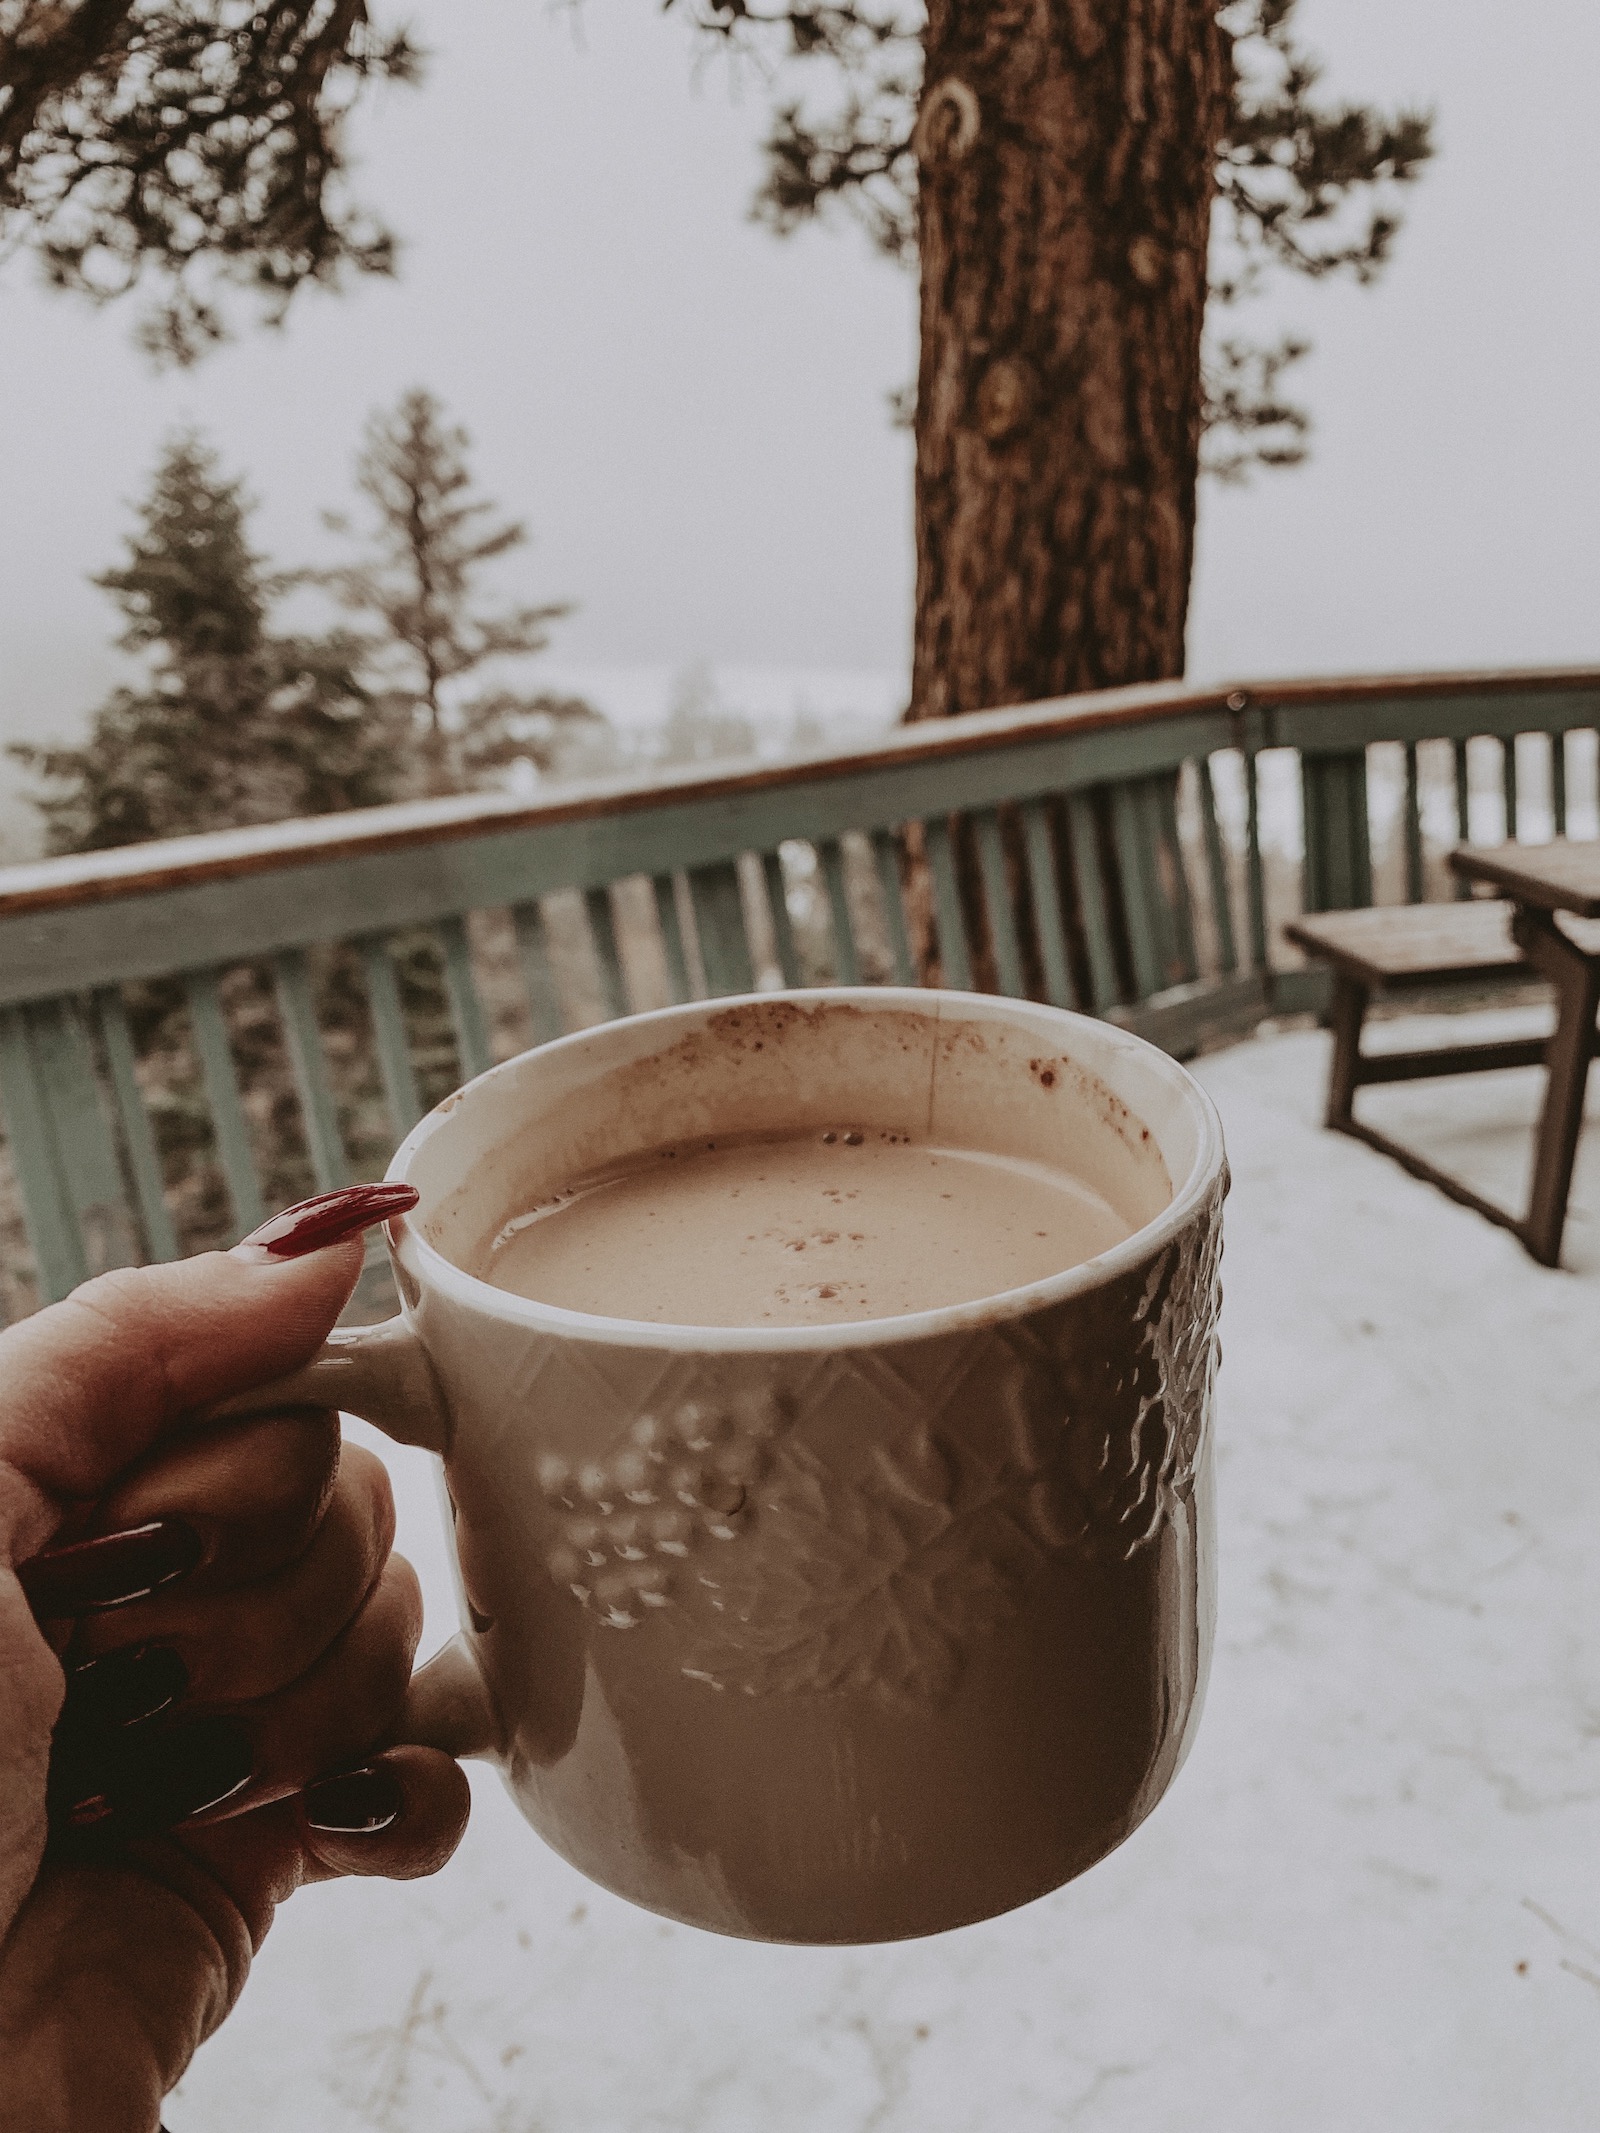 A Weekend in Big Bear for New Year's | Winter Wonderland | Travel Inspo | Mountains | Winter Trip | Blondie in the City by Hayley Larue